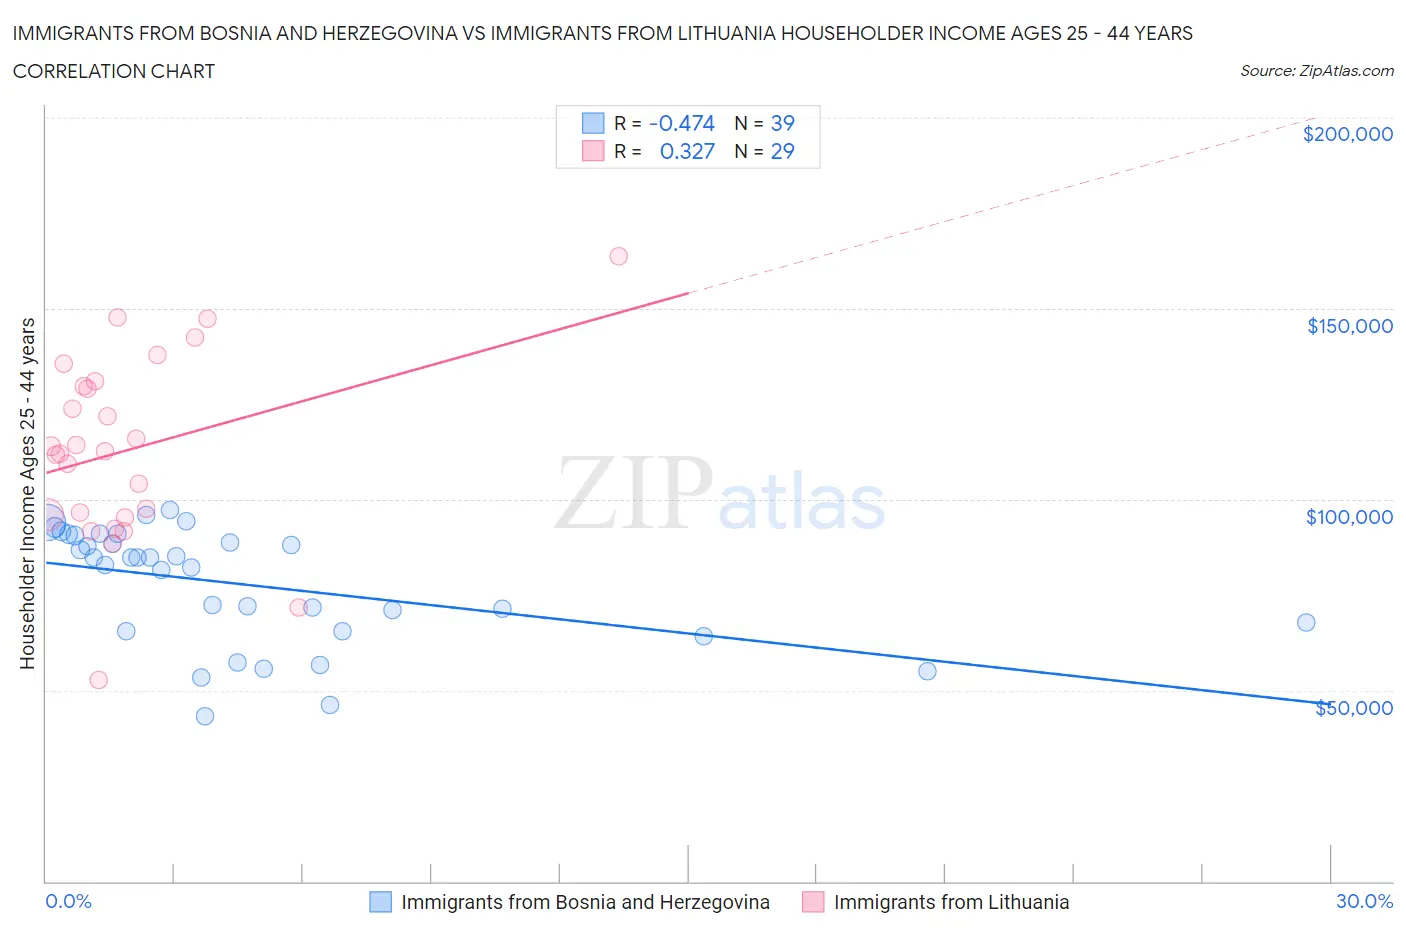 Immigrants from Bosnia and Herzegovina vs Immigrants from Lithuania Householder Income Ages 25 - 44 years